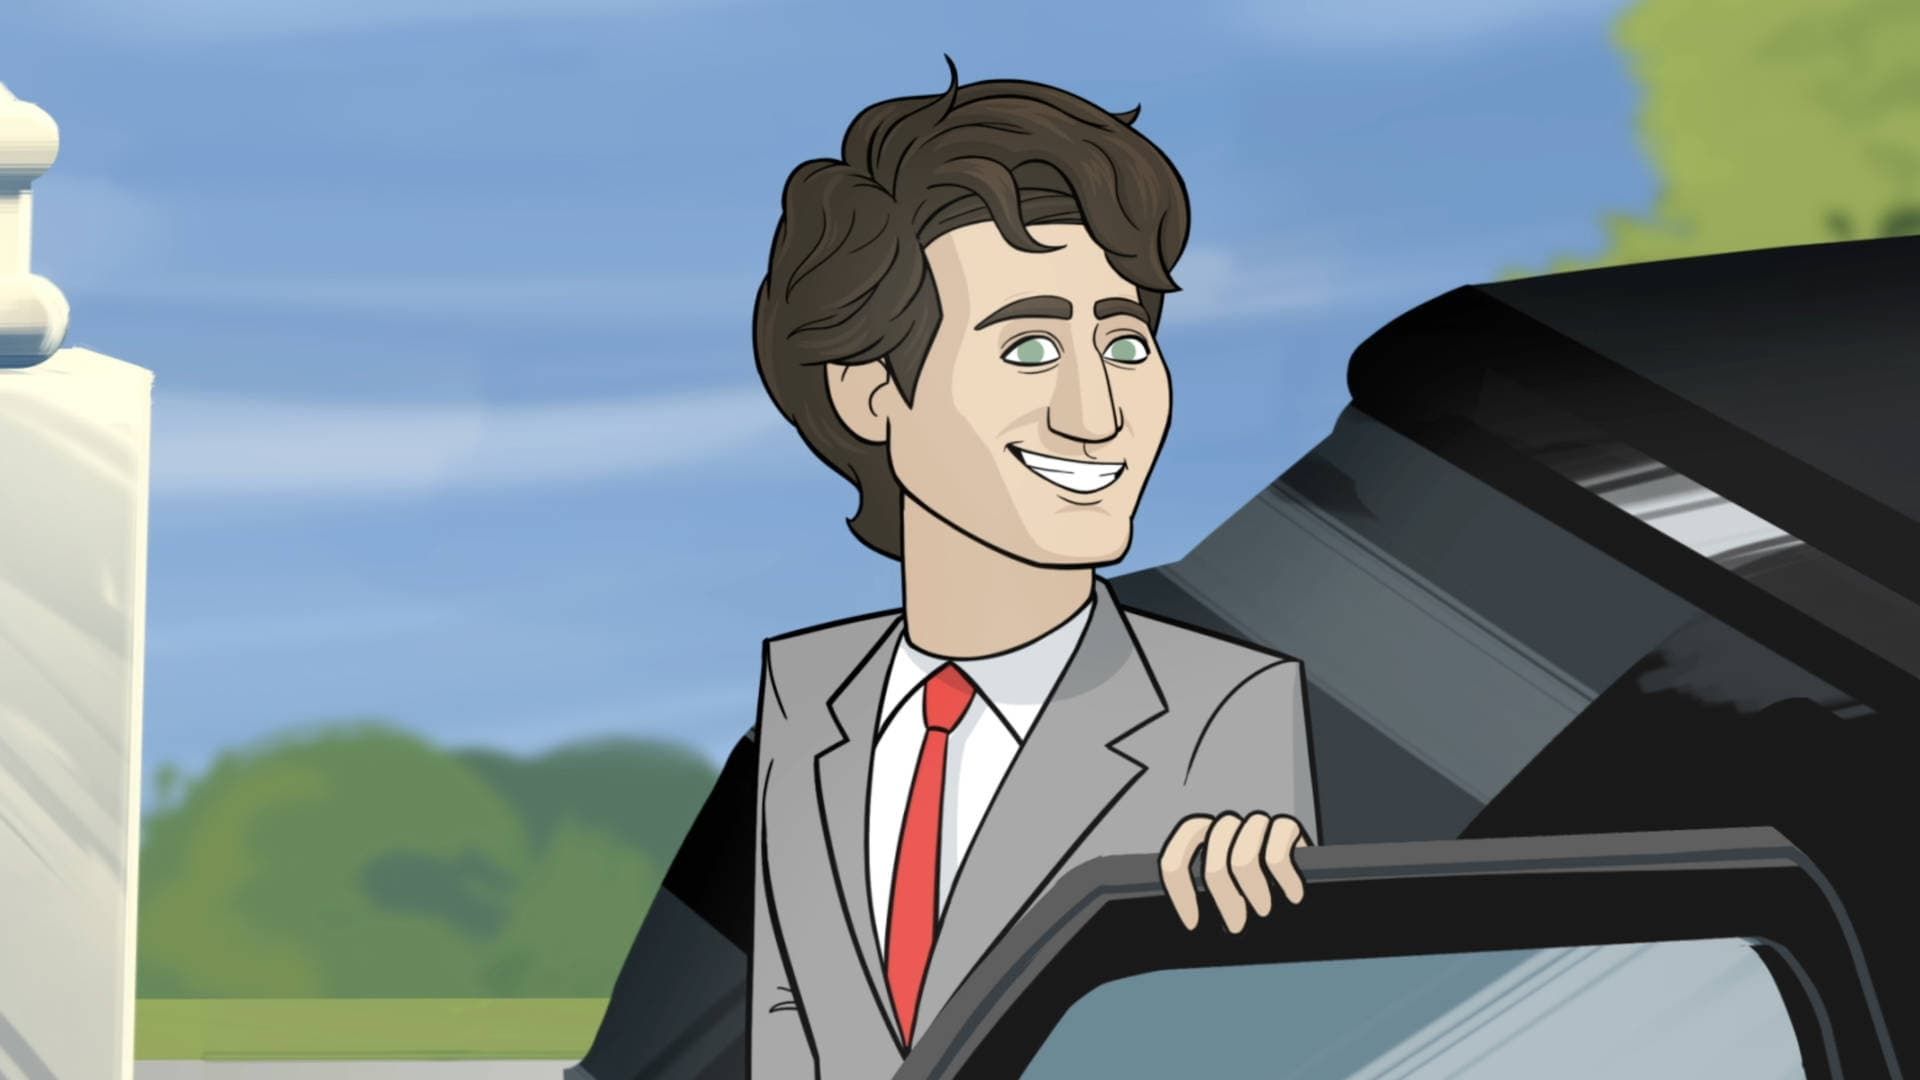 Our Cartoon President background